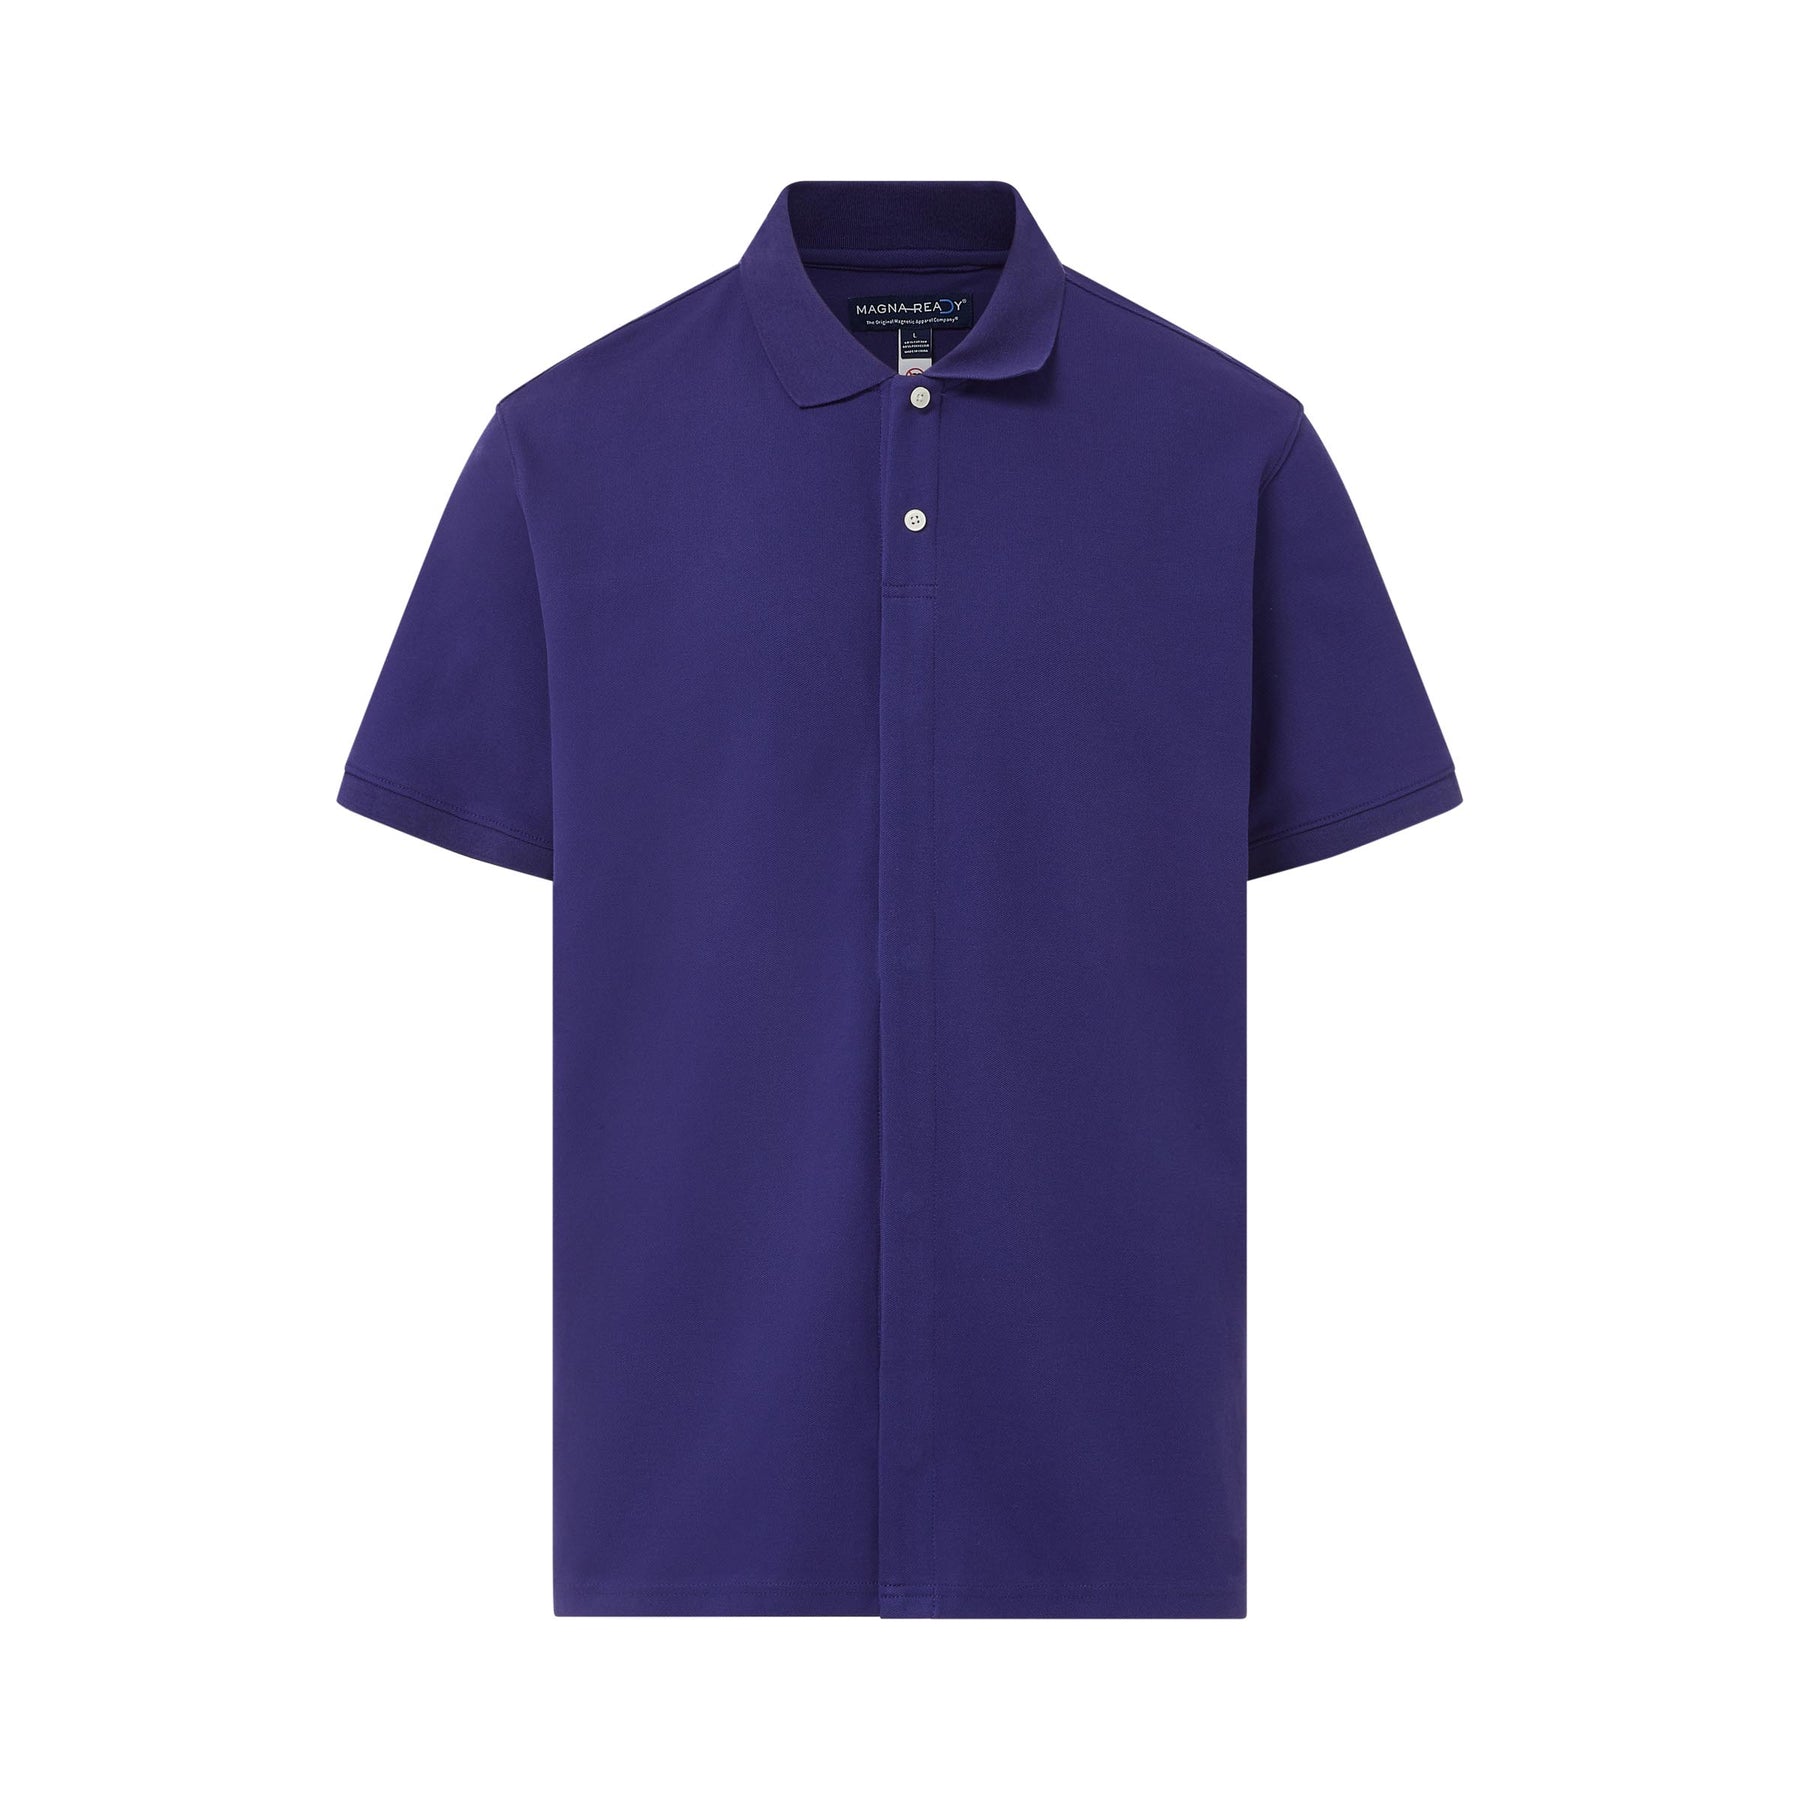 Navy Pique Knit Short Sleeve Polo with Magnetic Closures